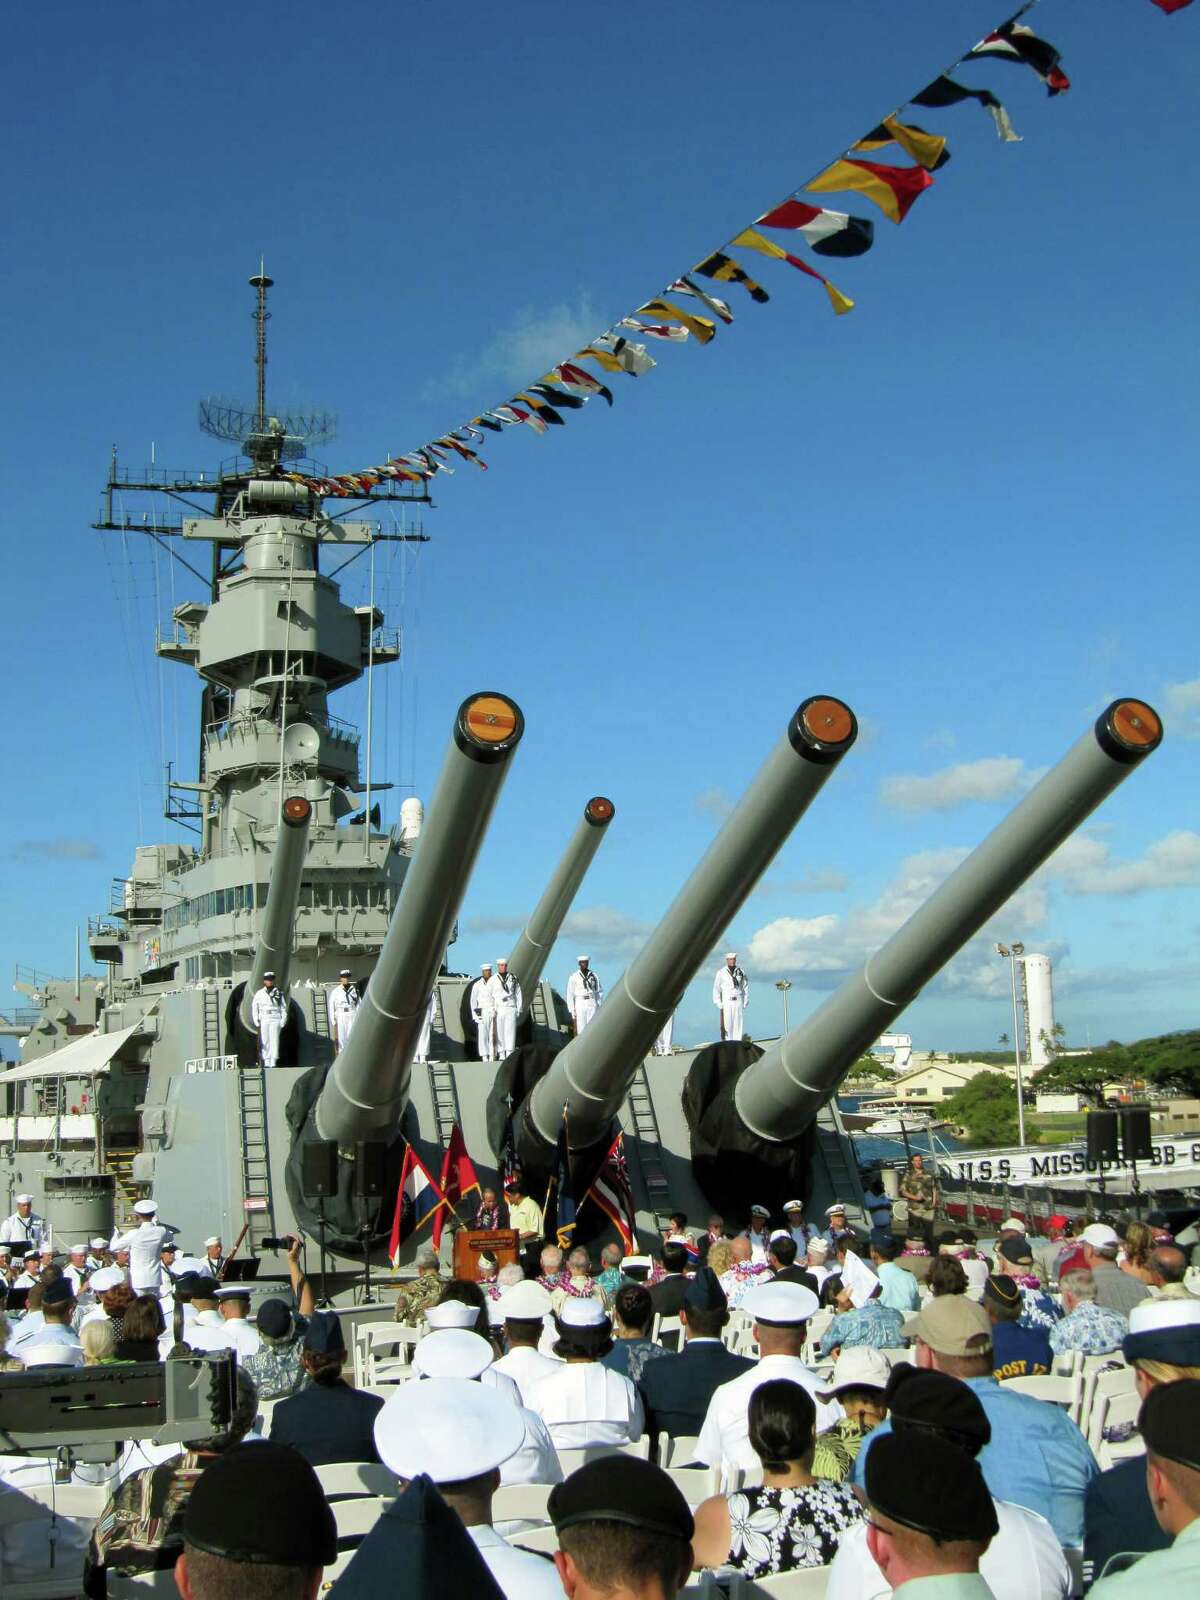 The USS Missouri is permanently moored in Pearl Harbor. On Sept. 2, 1945, Imperial Japan surrendered aboard the battleship USS Missouri in Tokyo Harbor.